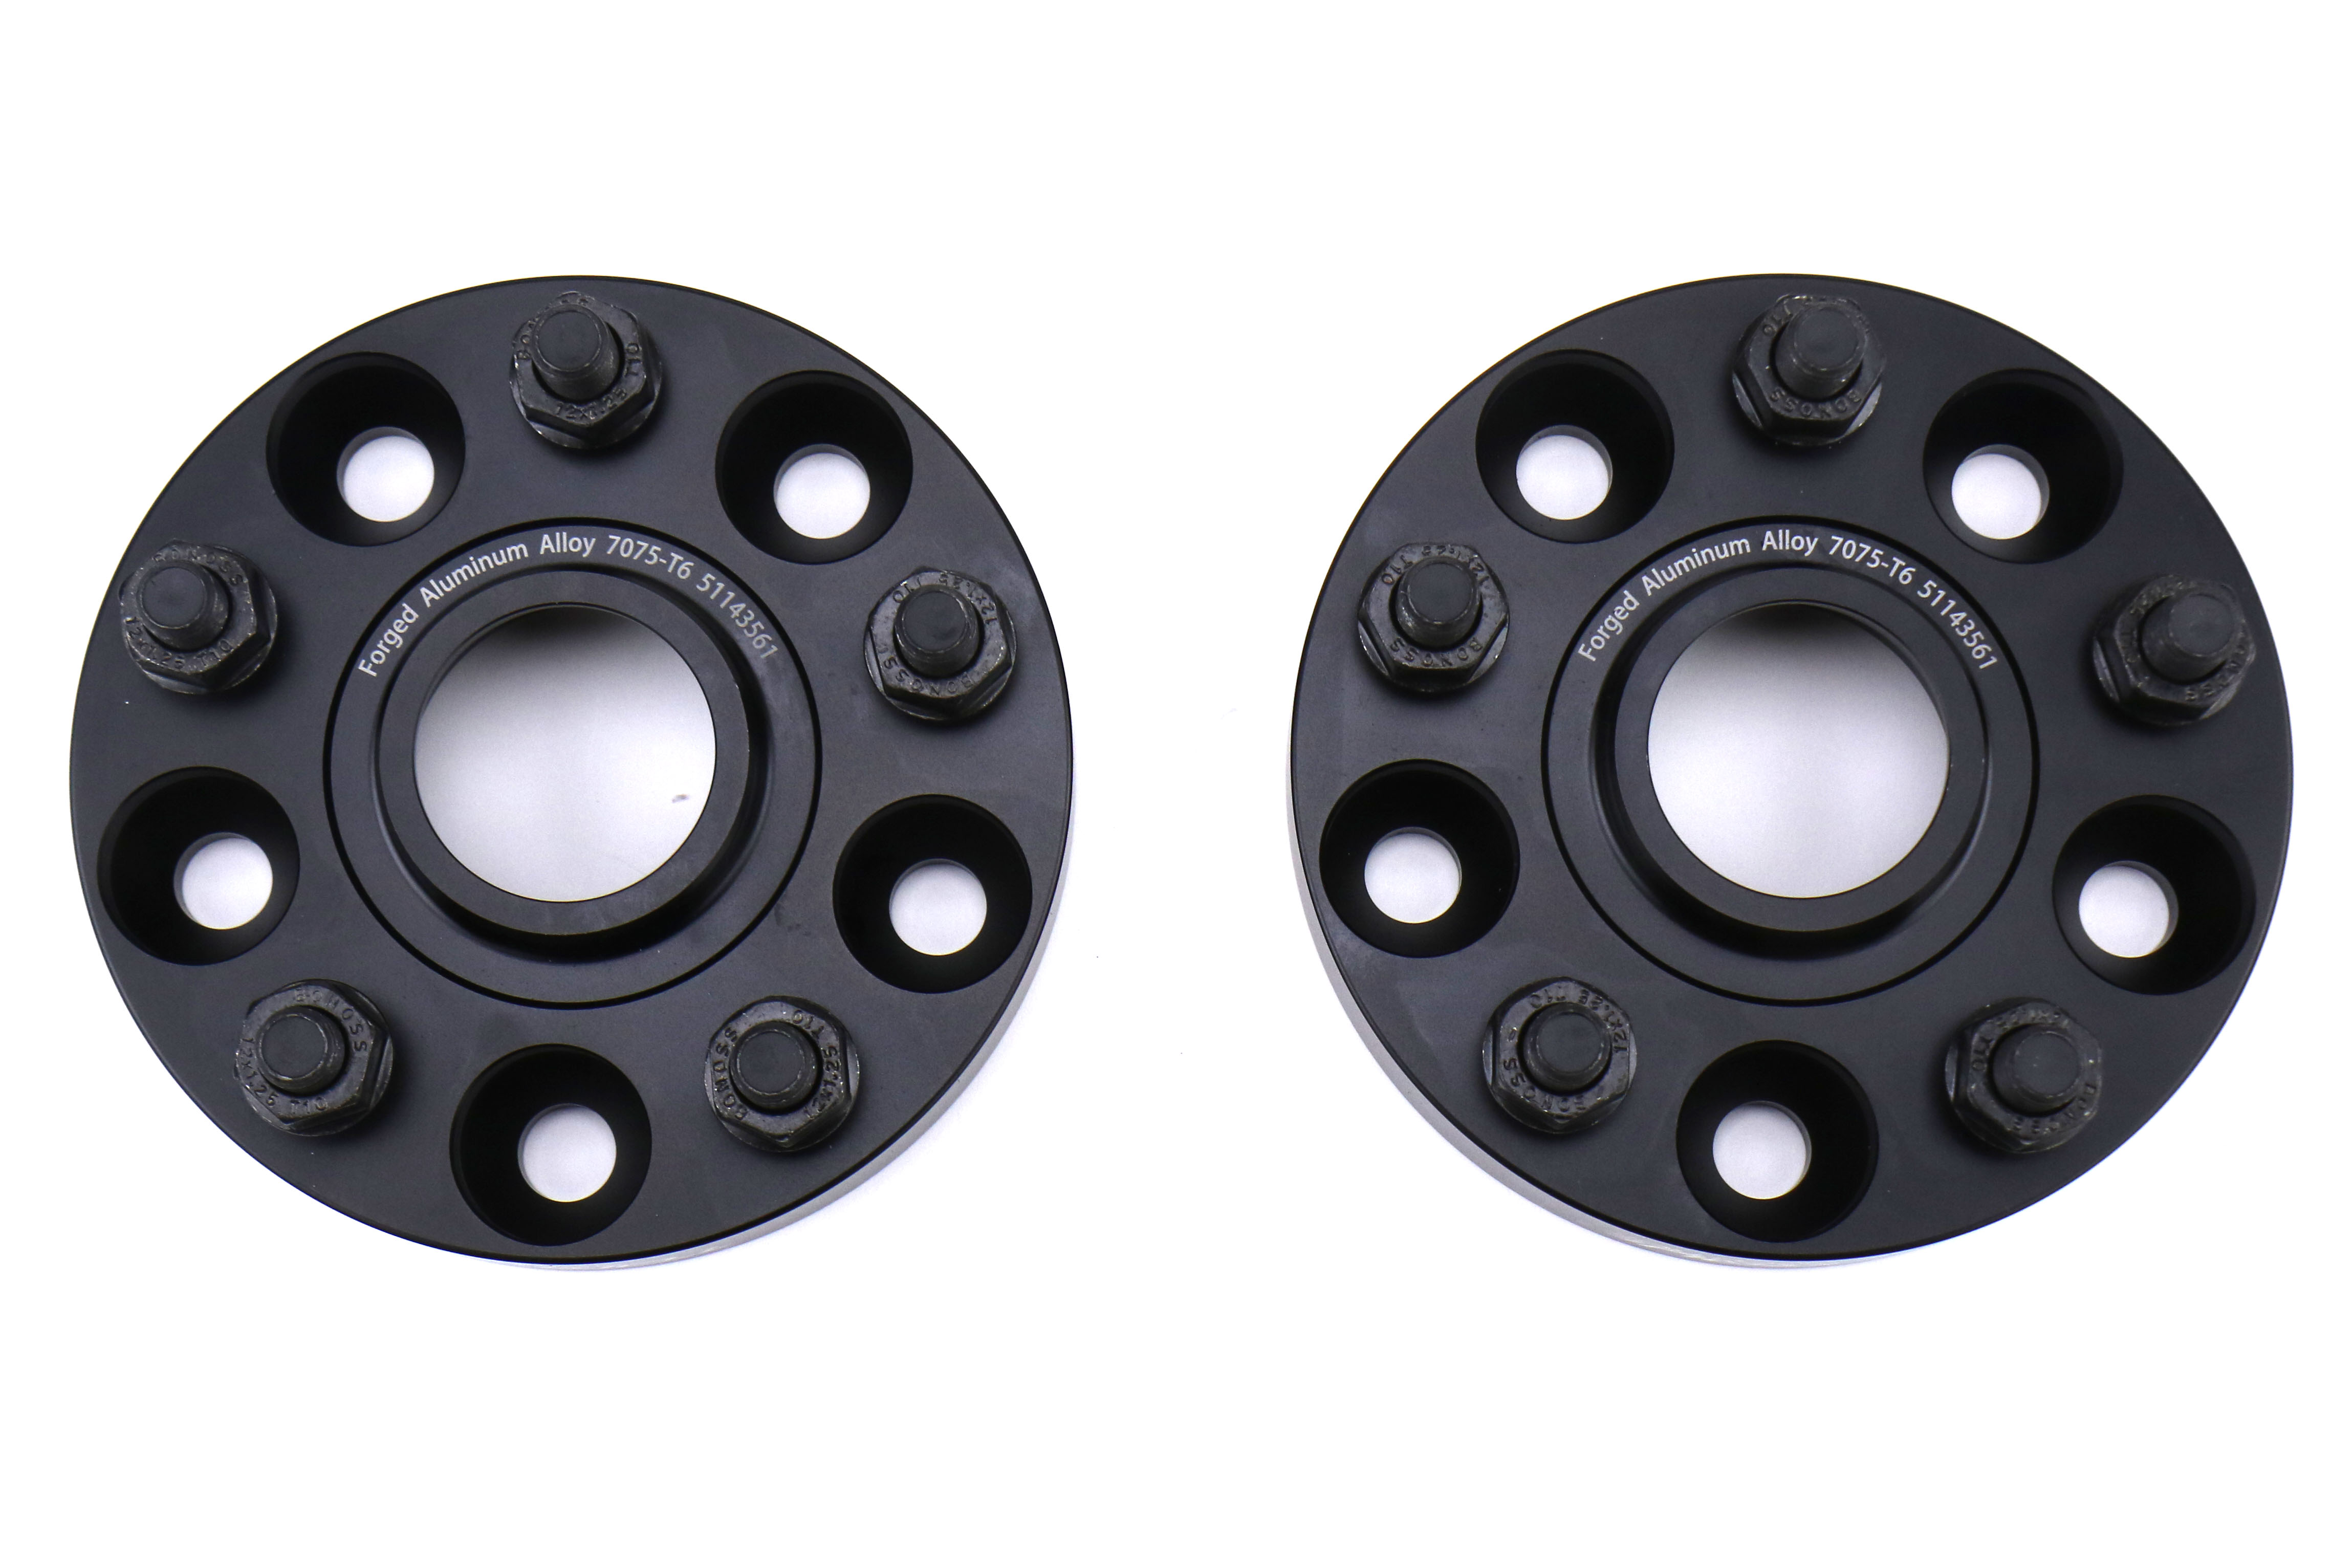 Torque Solution Forged Aluminum Wheel Spacers 5x114.3 25mm Pair